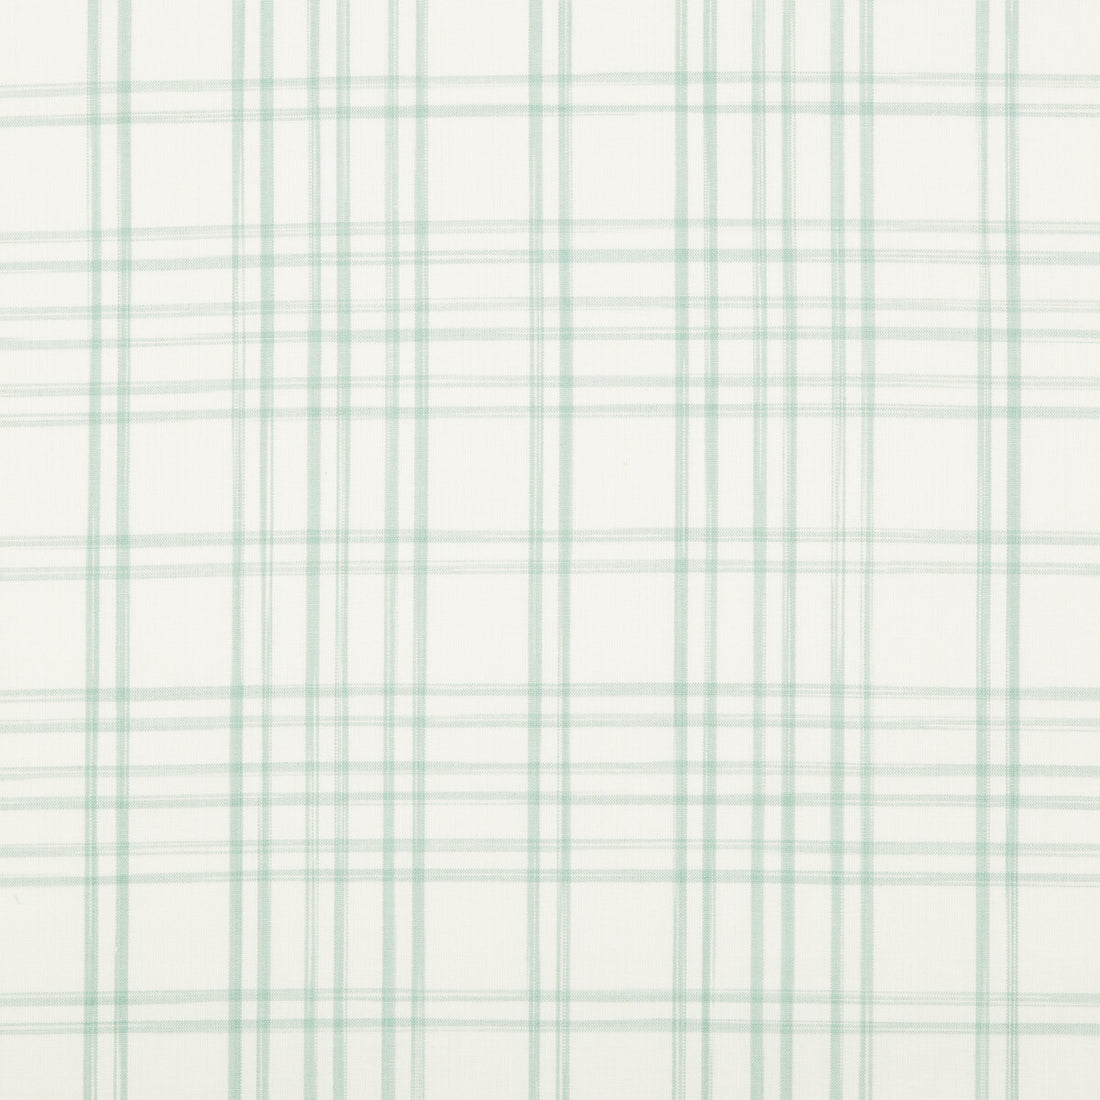 Banon Plaid fabric in aqua color - pattern 8017100.513.0 - by Brunschwig &amp; Fils in the Durance collection